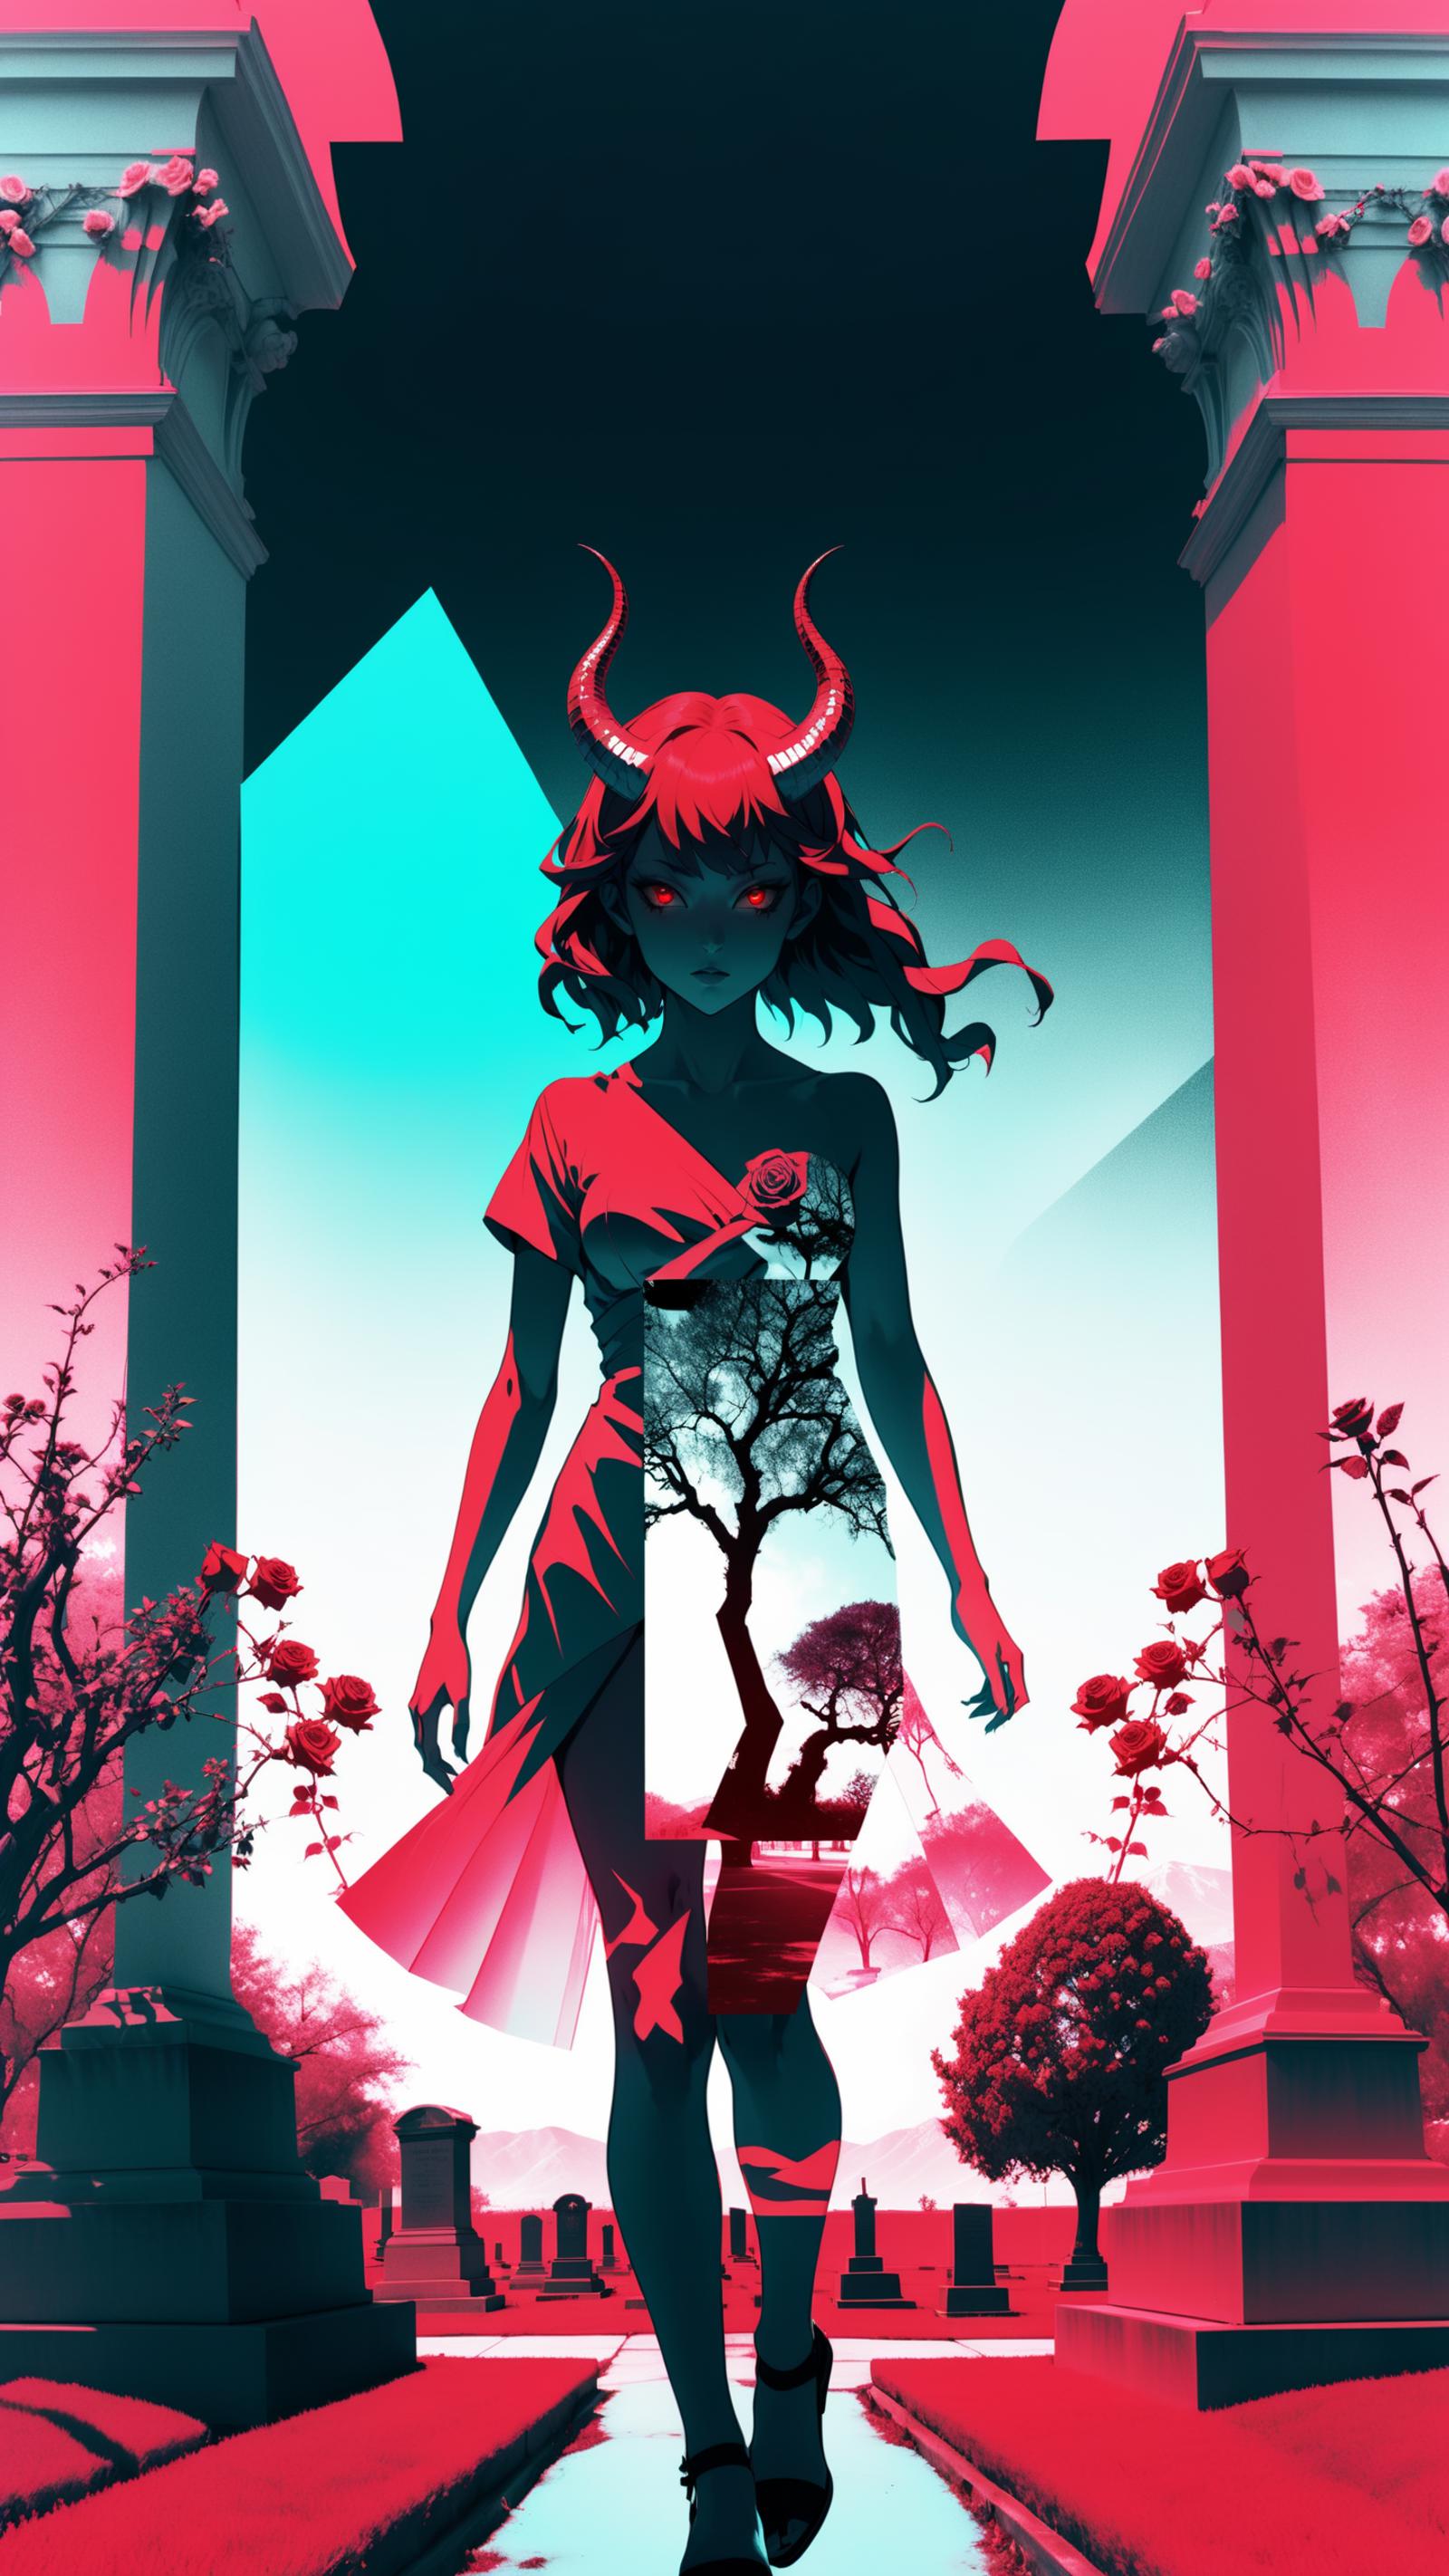 A woman with horns and a red dress is standing in front of a tree.